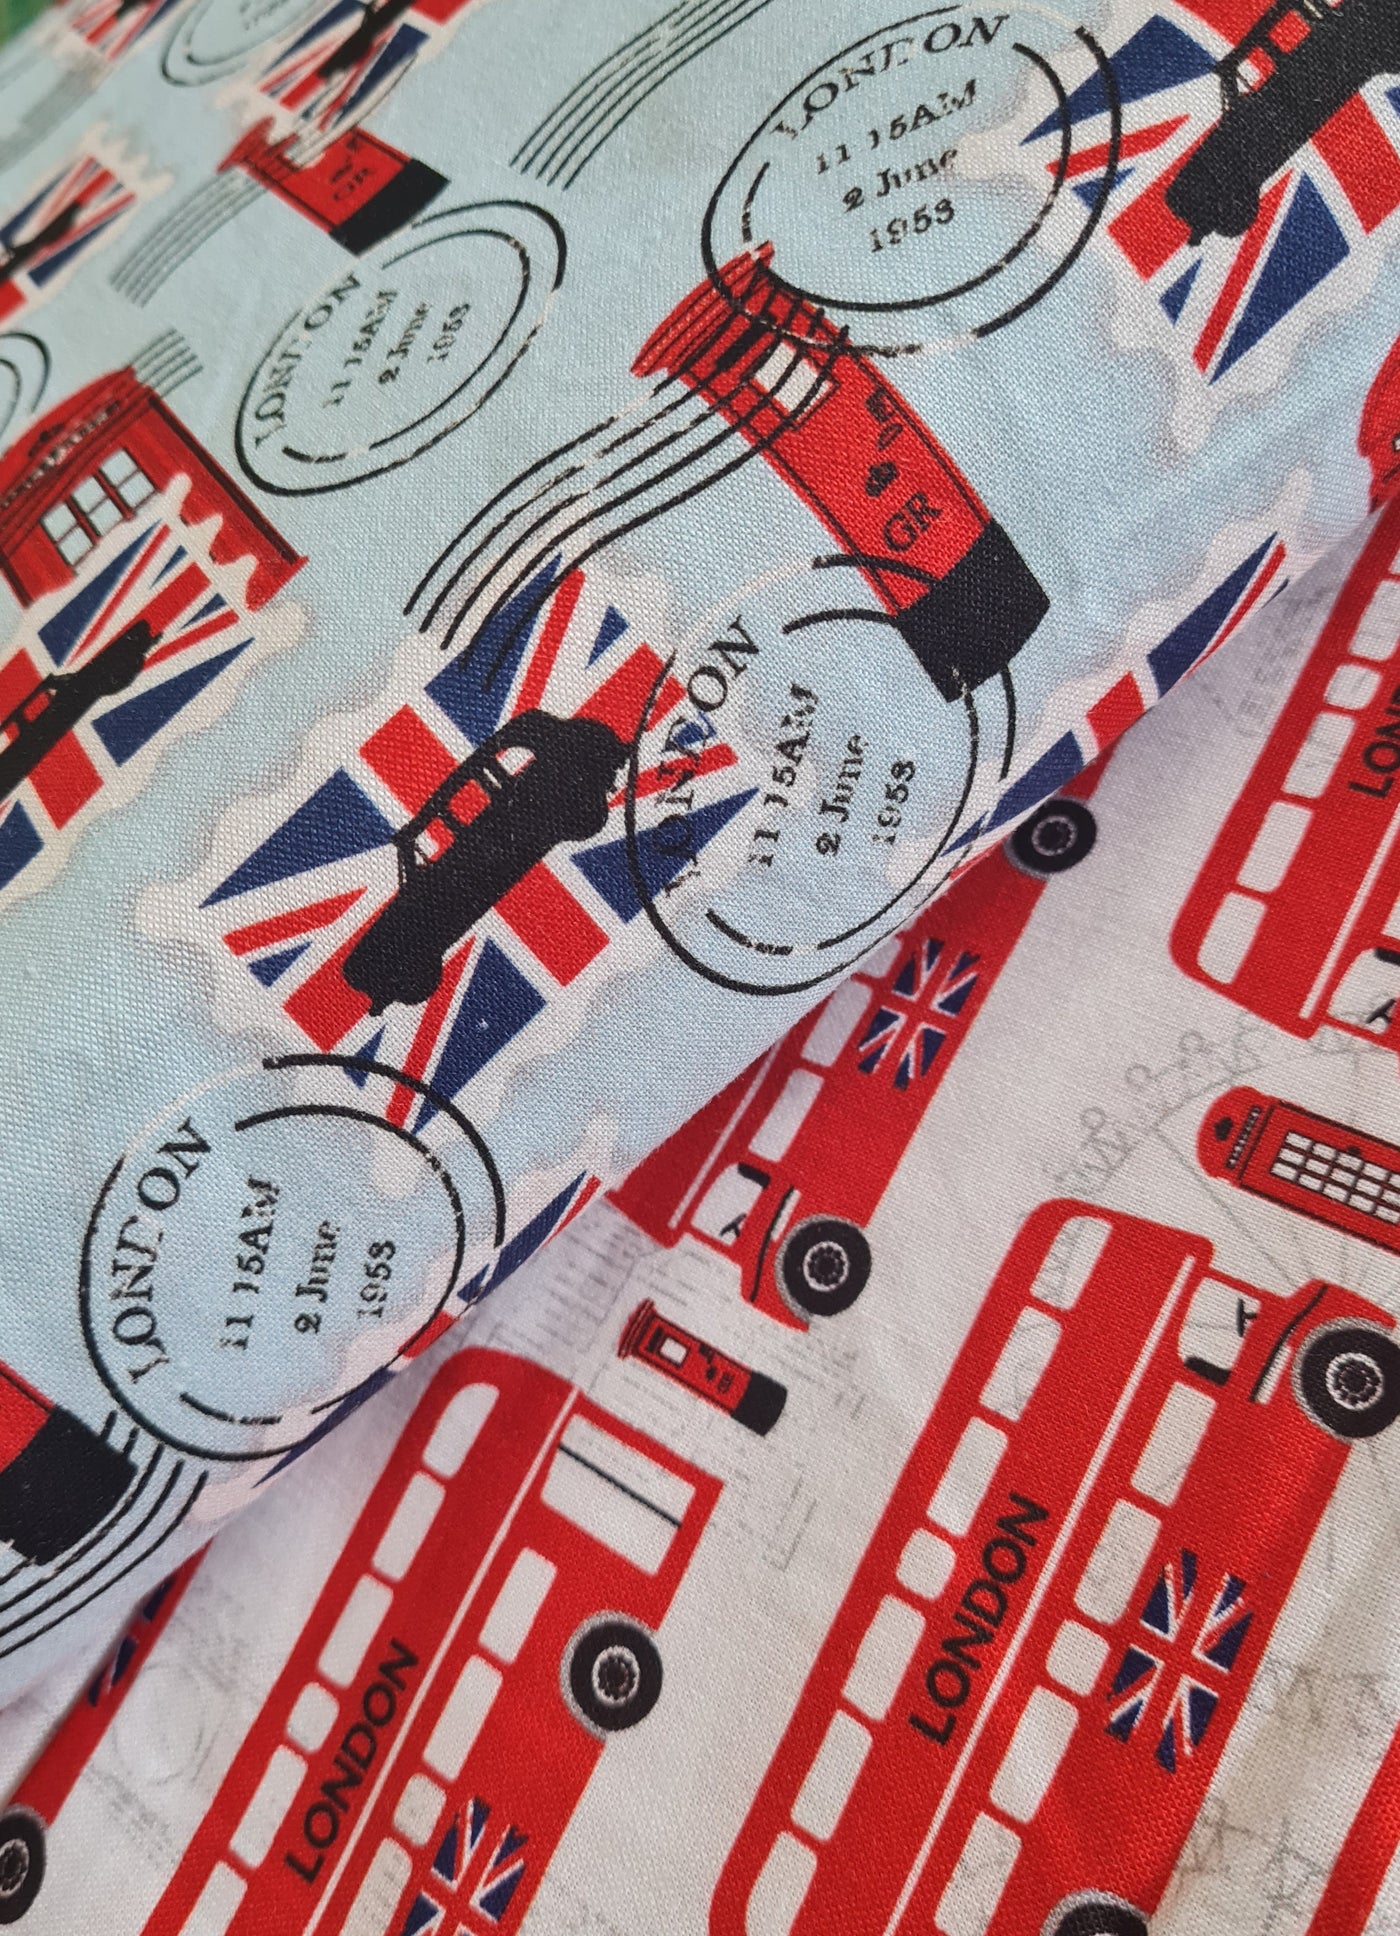 London buses, British stamps and Union Jacks. Queen Jubilee cotton quilting fabric.